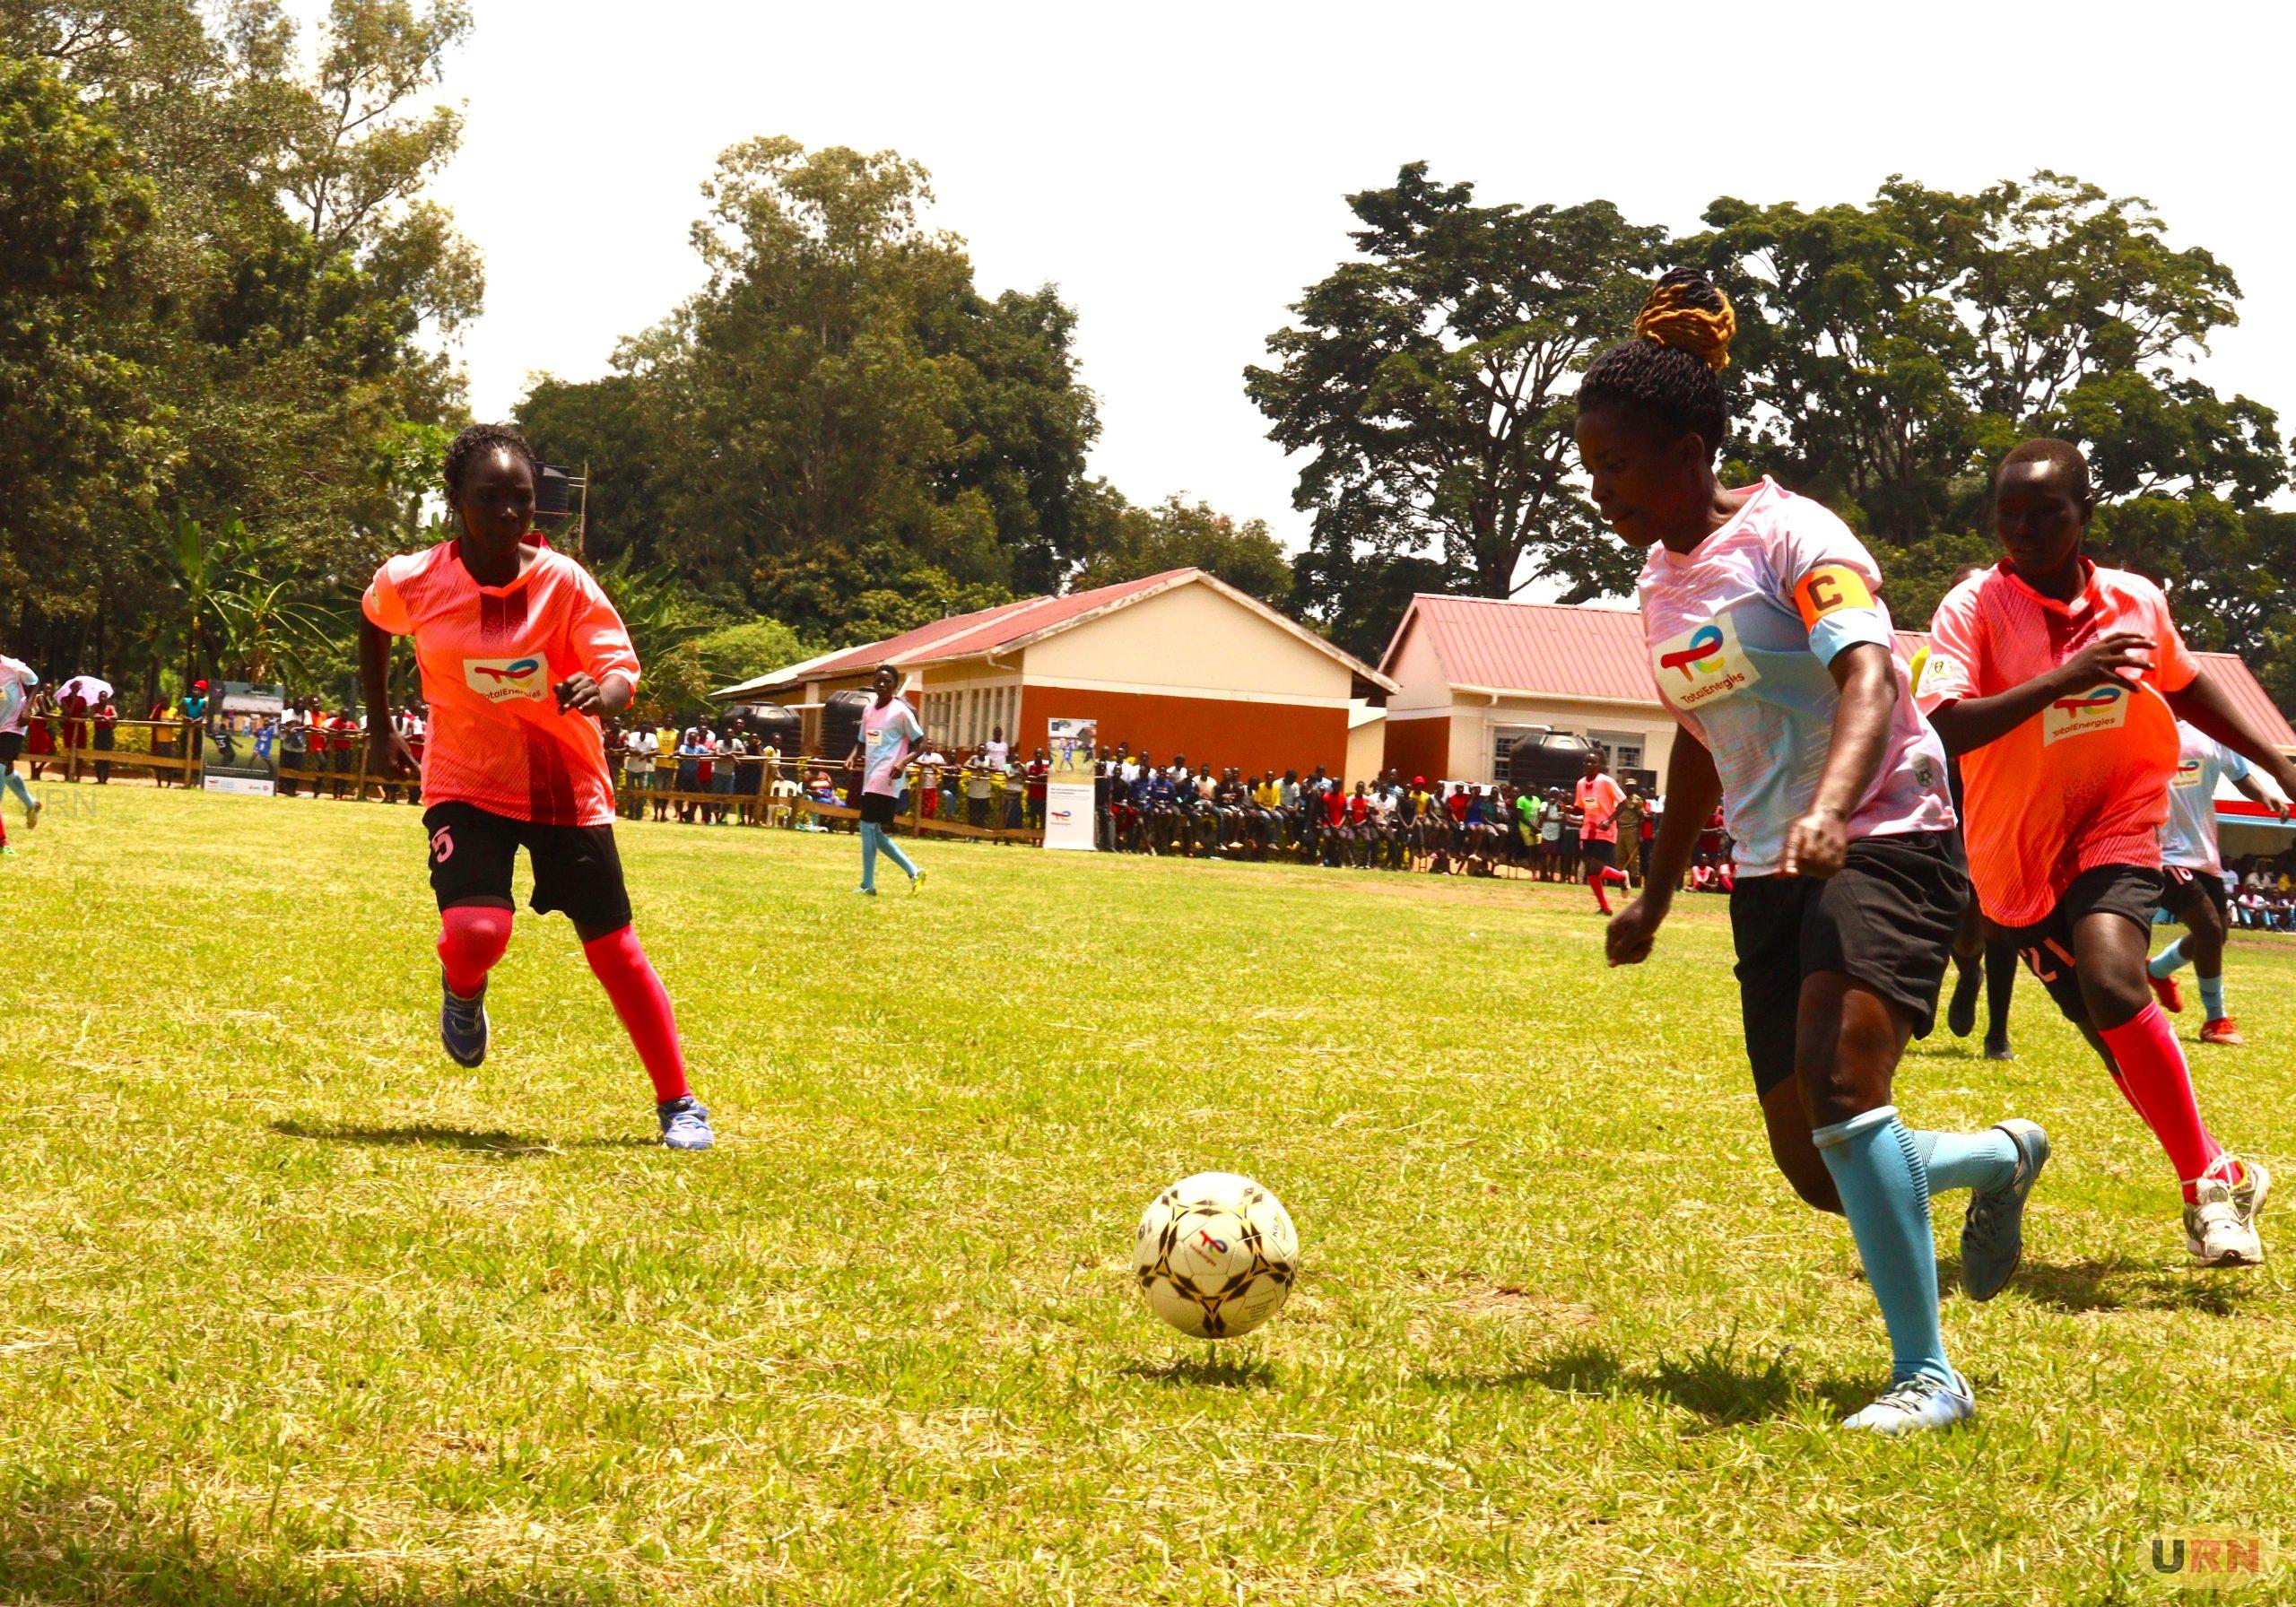 Irene Agenorwot, Queen Lioness Football Club Captian dribbles the ball during Saturday's Total Energies E&P openning football tournament in Anaka Town Council in Nwoya District